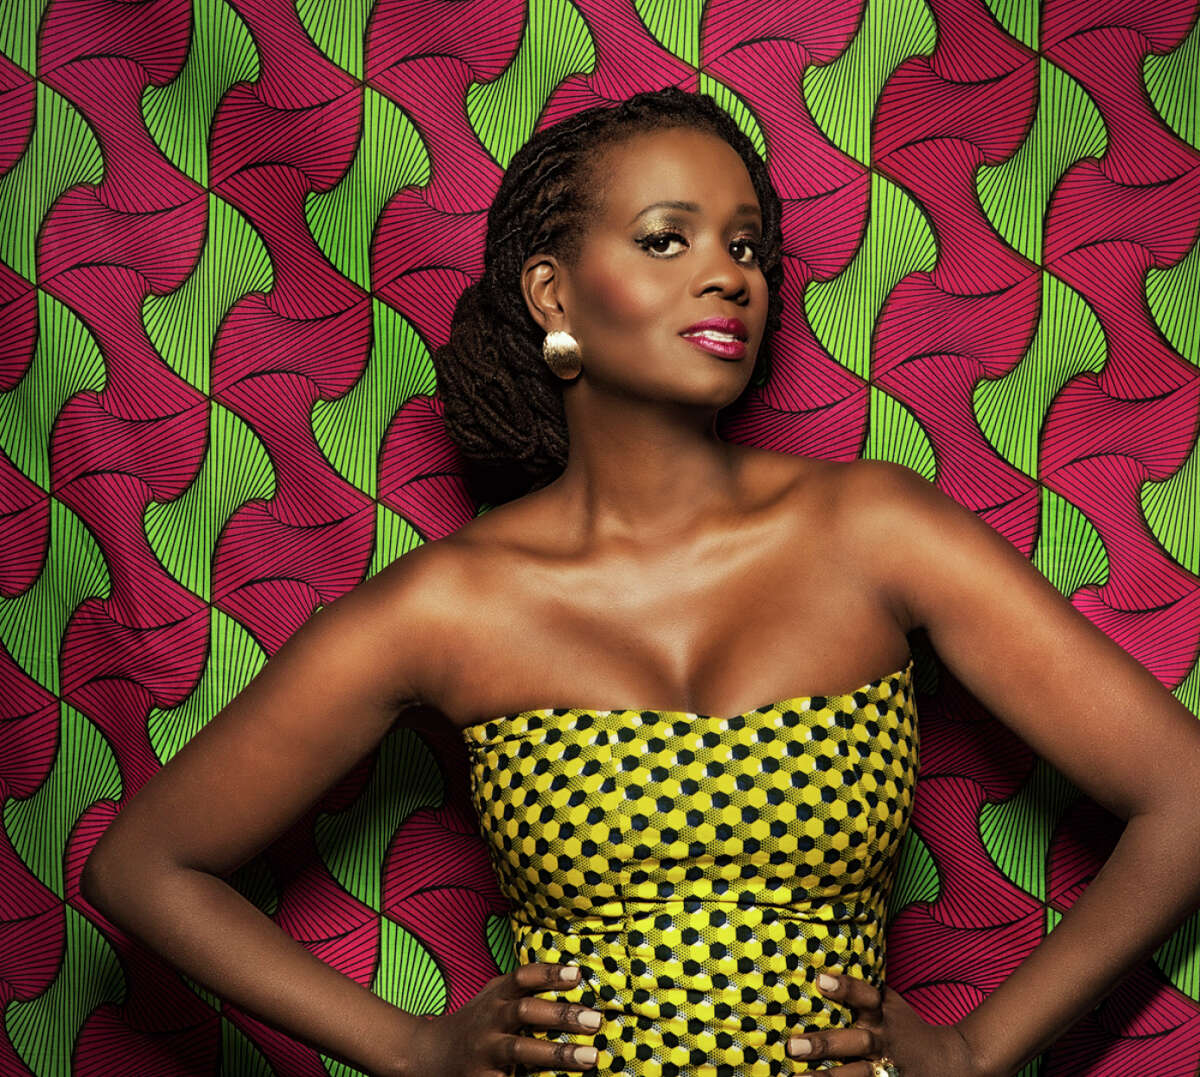 Jazz singer Somi's career is infused with the spirit of Africa